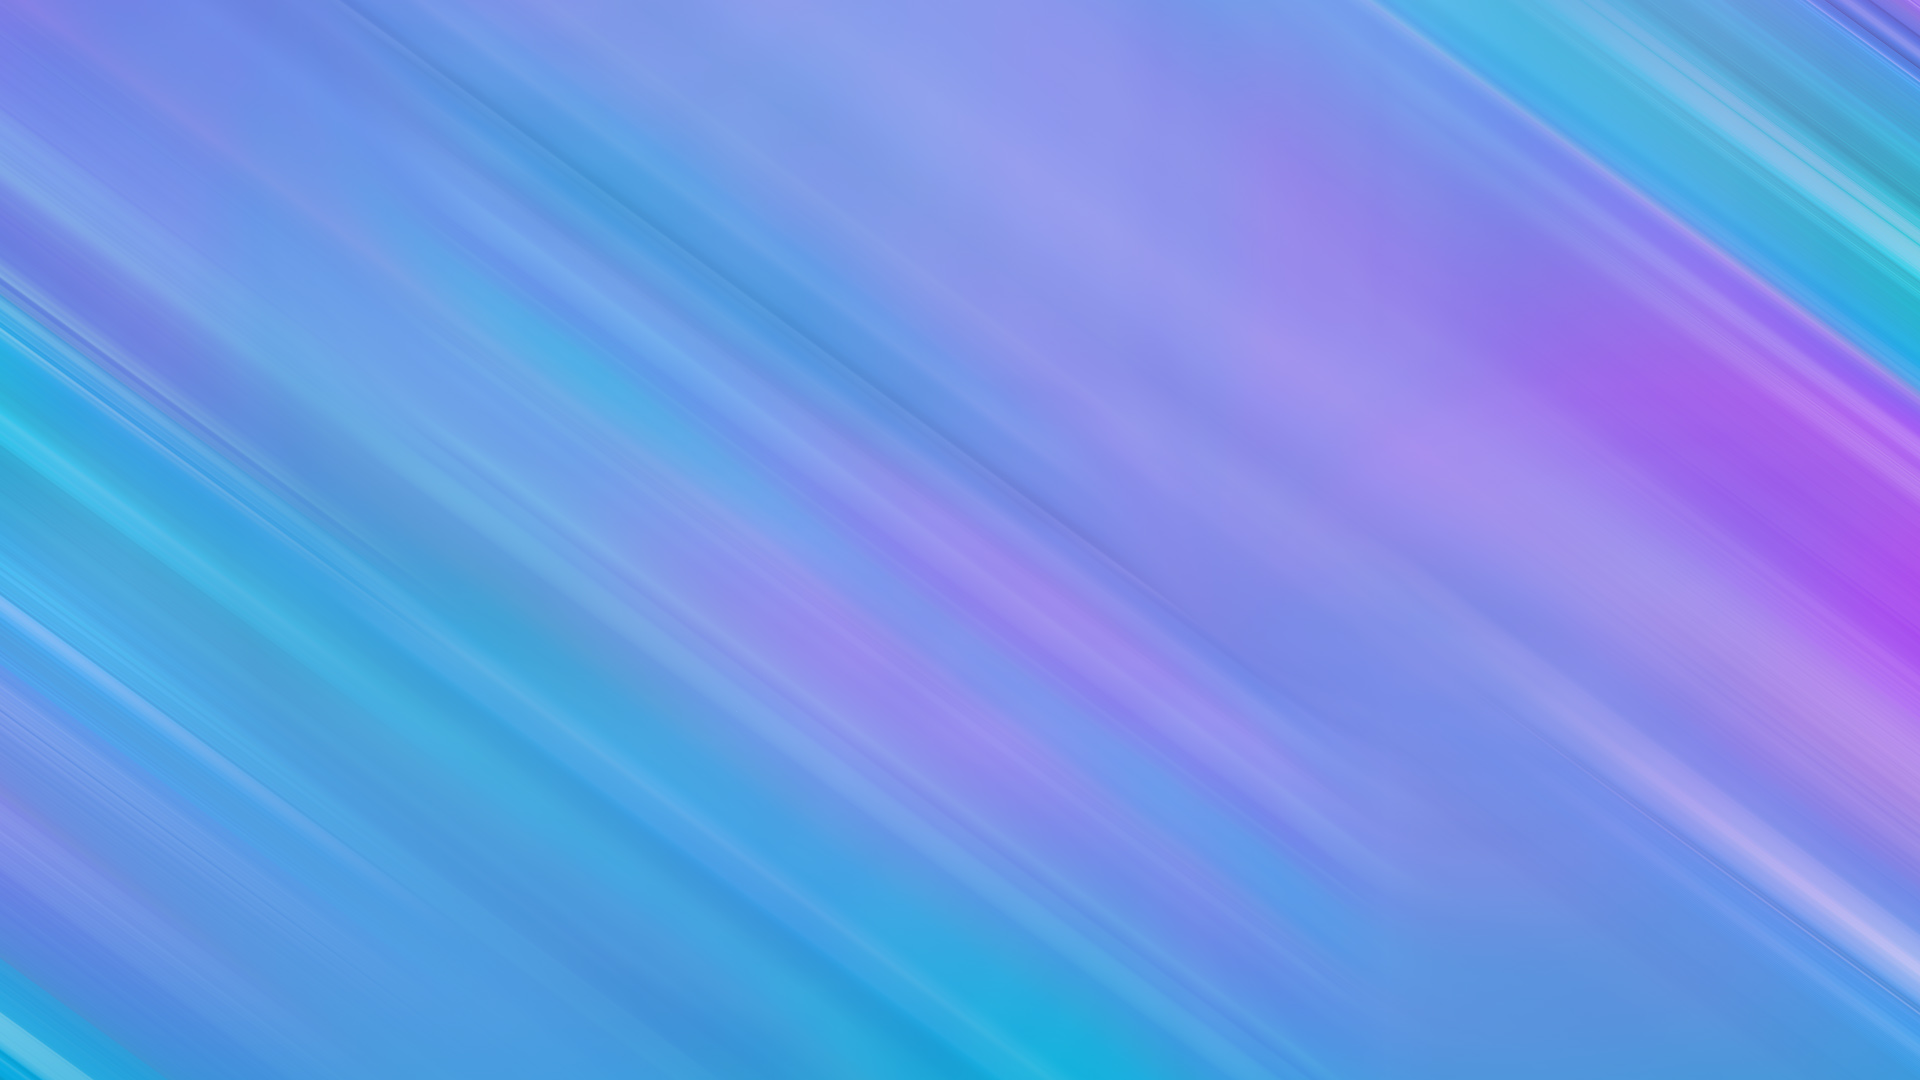 Gradient background #16 by Mimosa: \